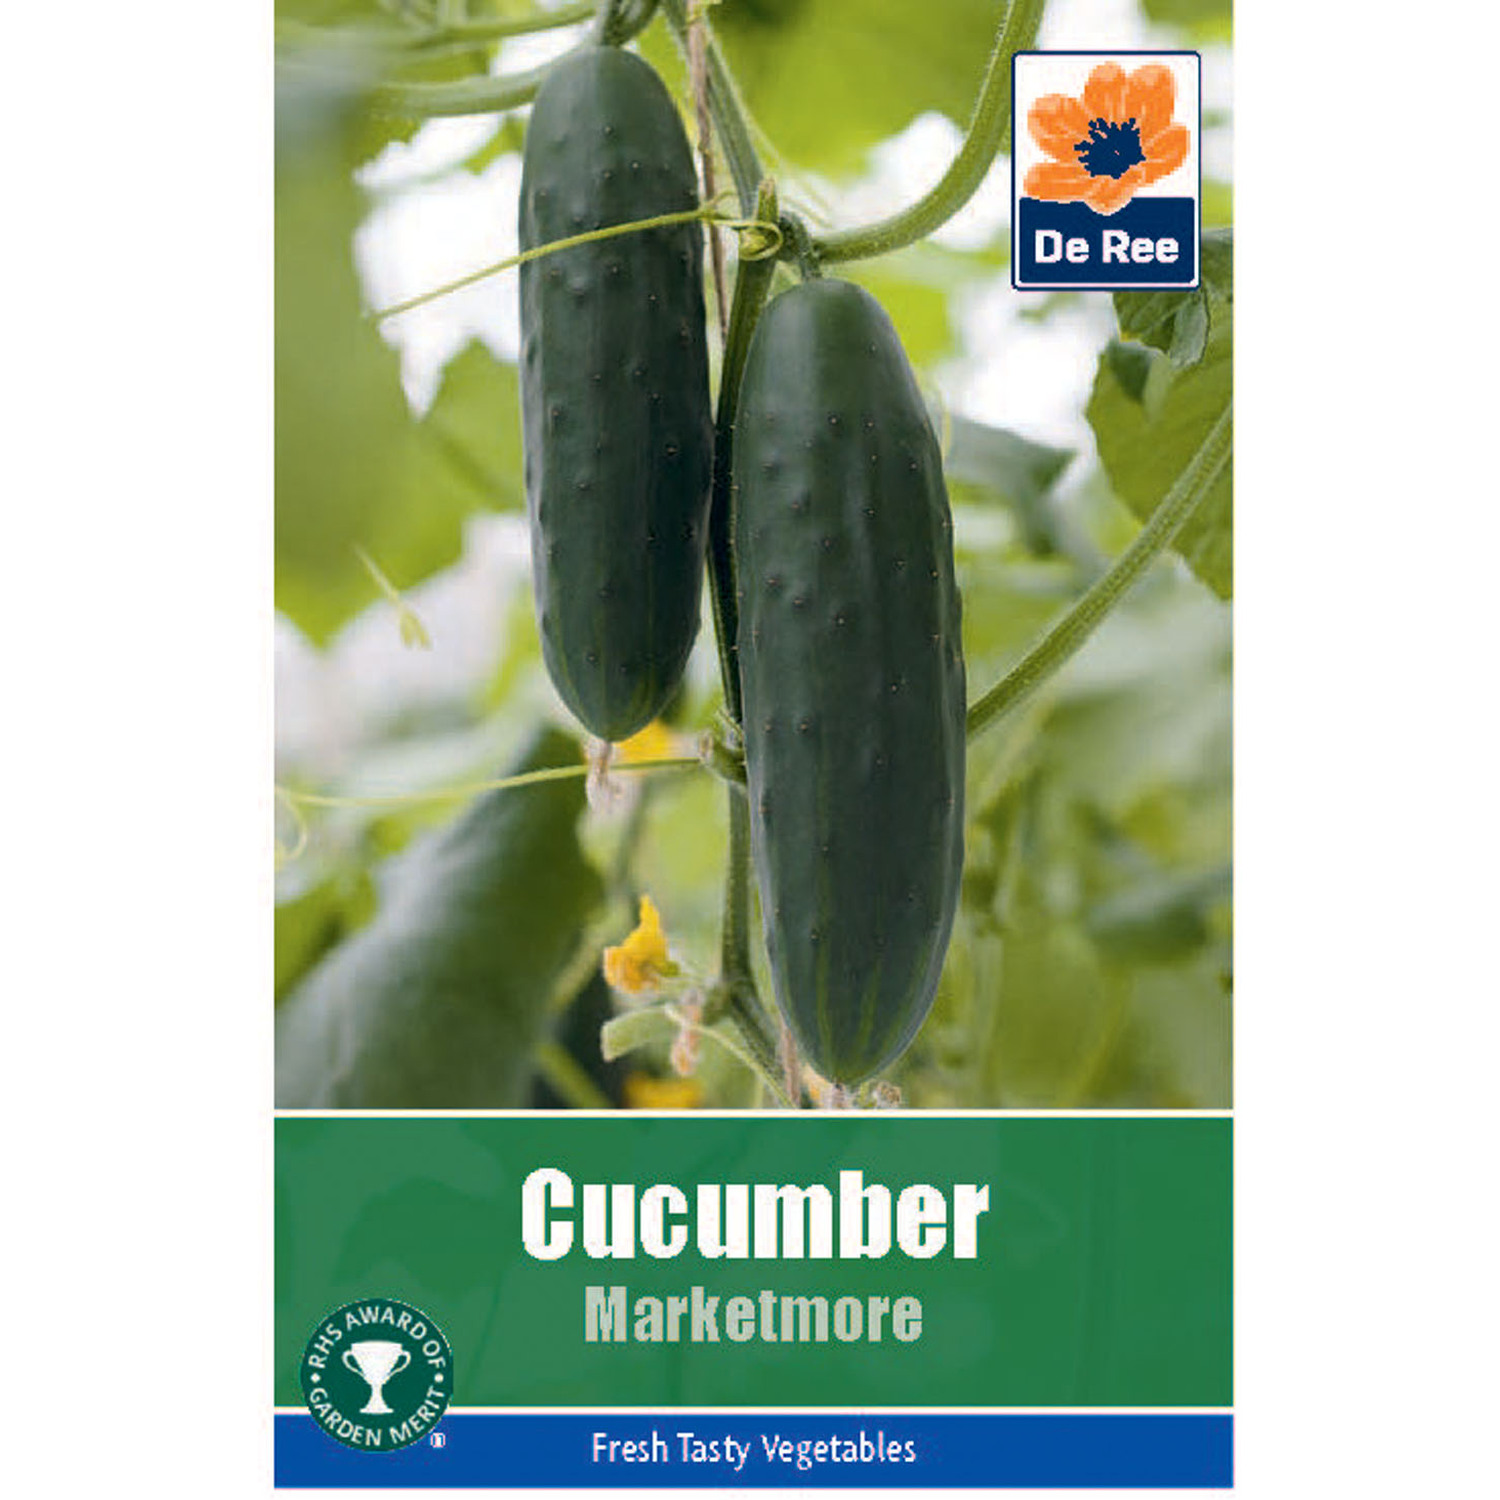 De Ree Marketer Cucumber Seed Packet Image